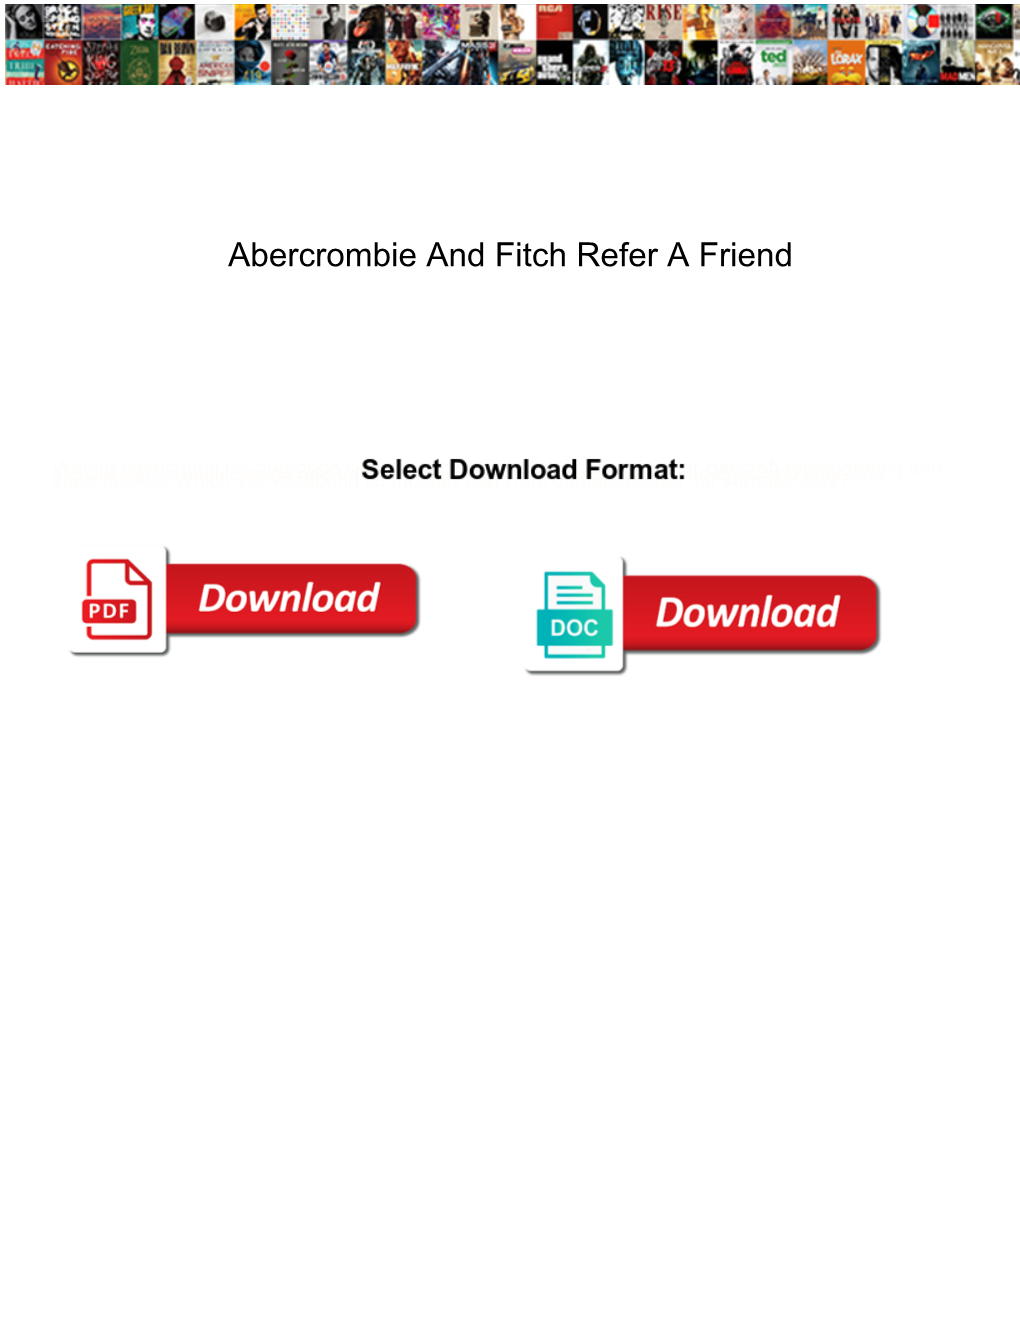 Abercrombie and Fitch Refer a Friend